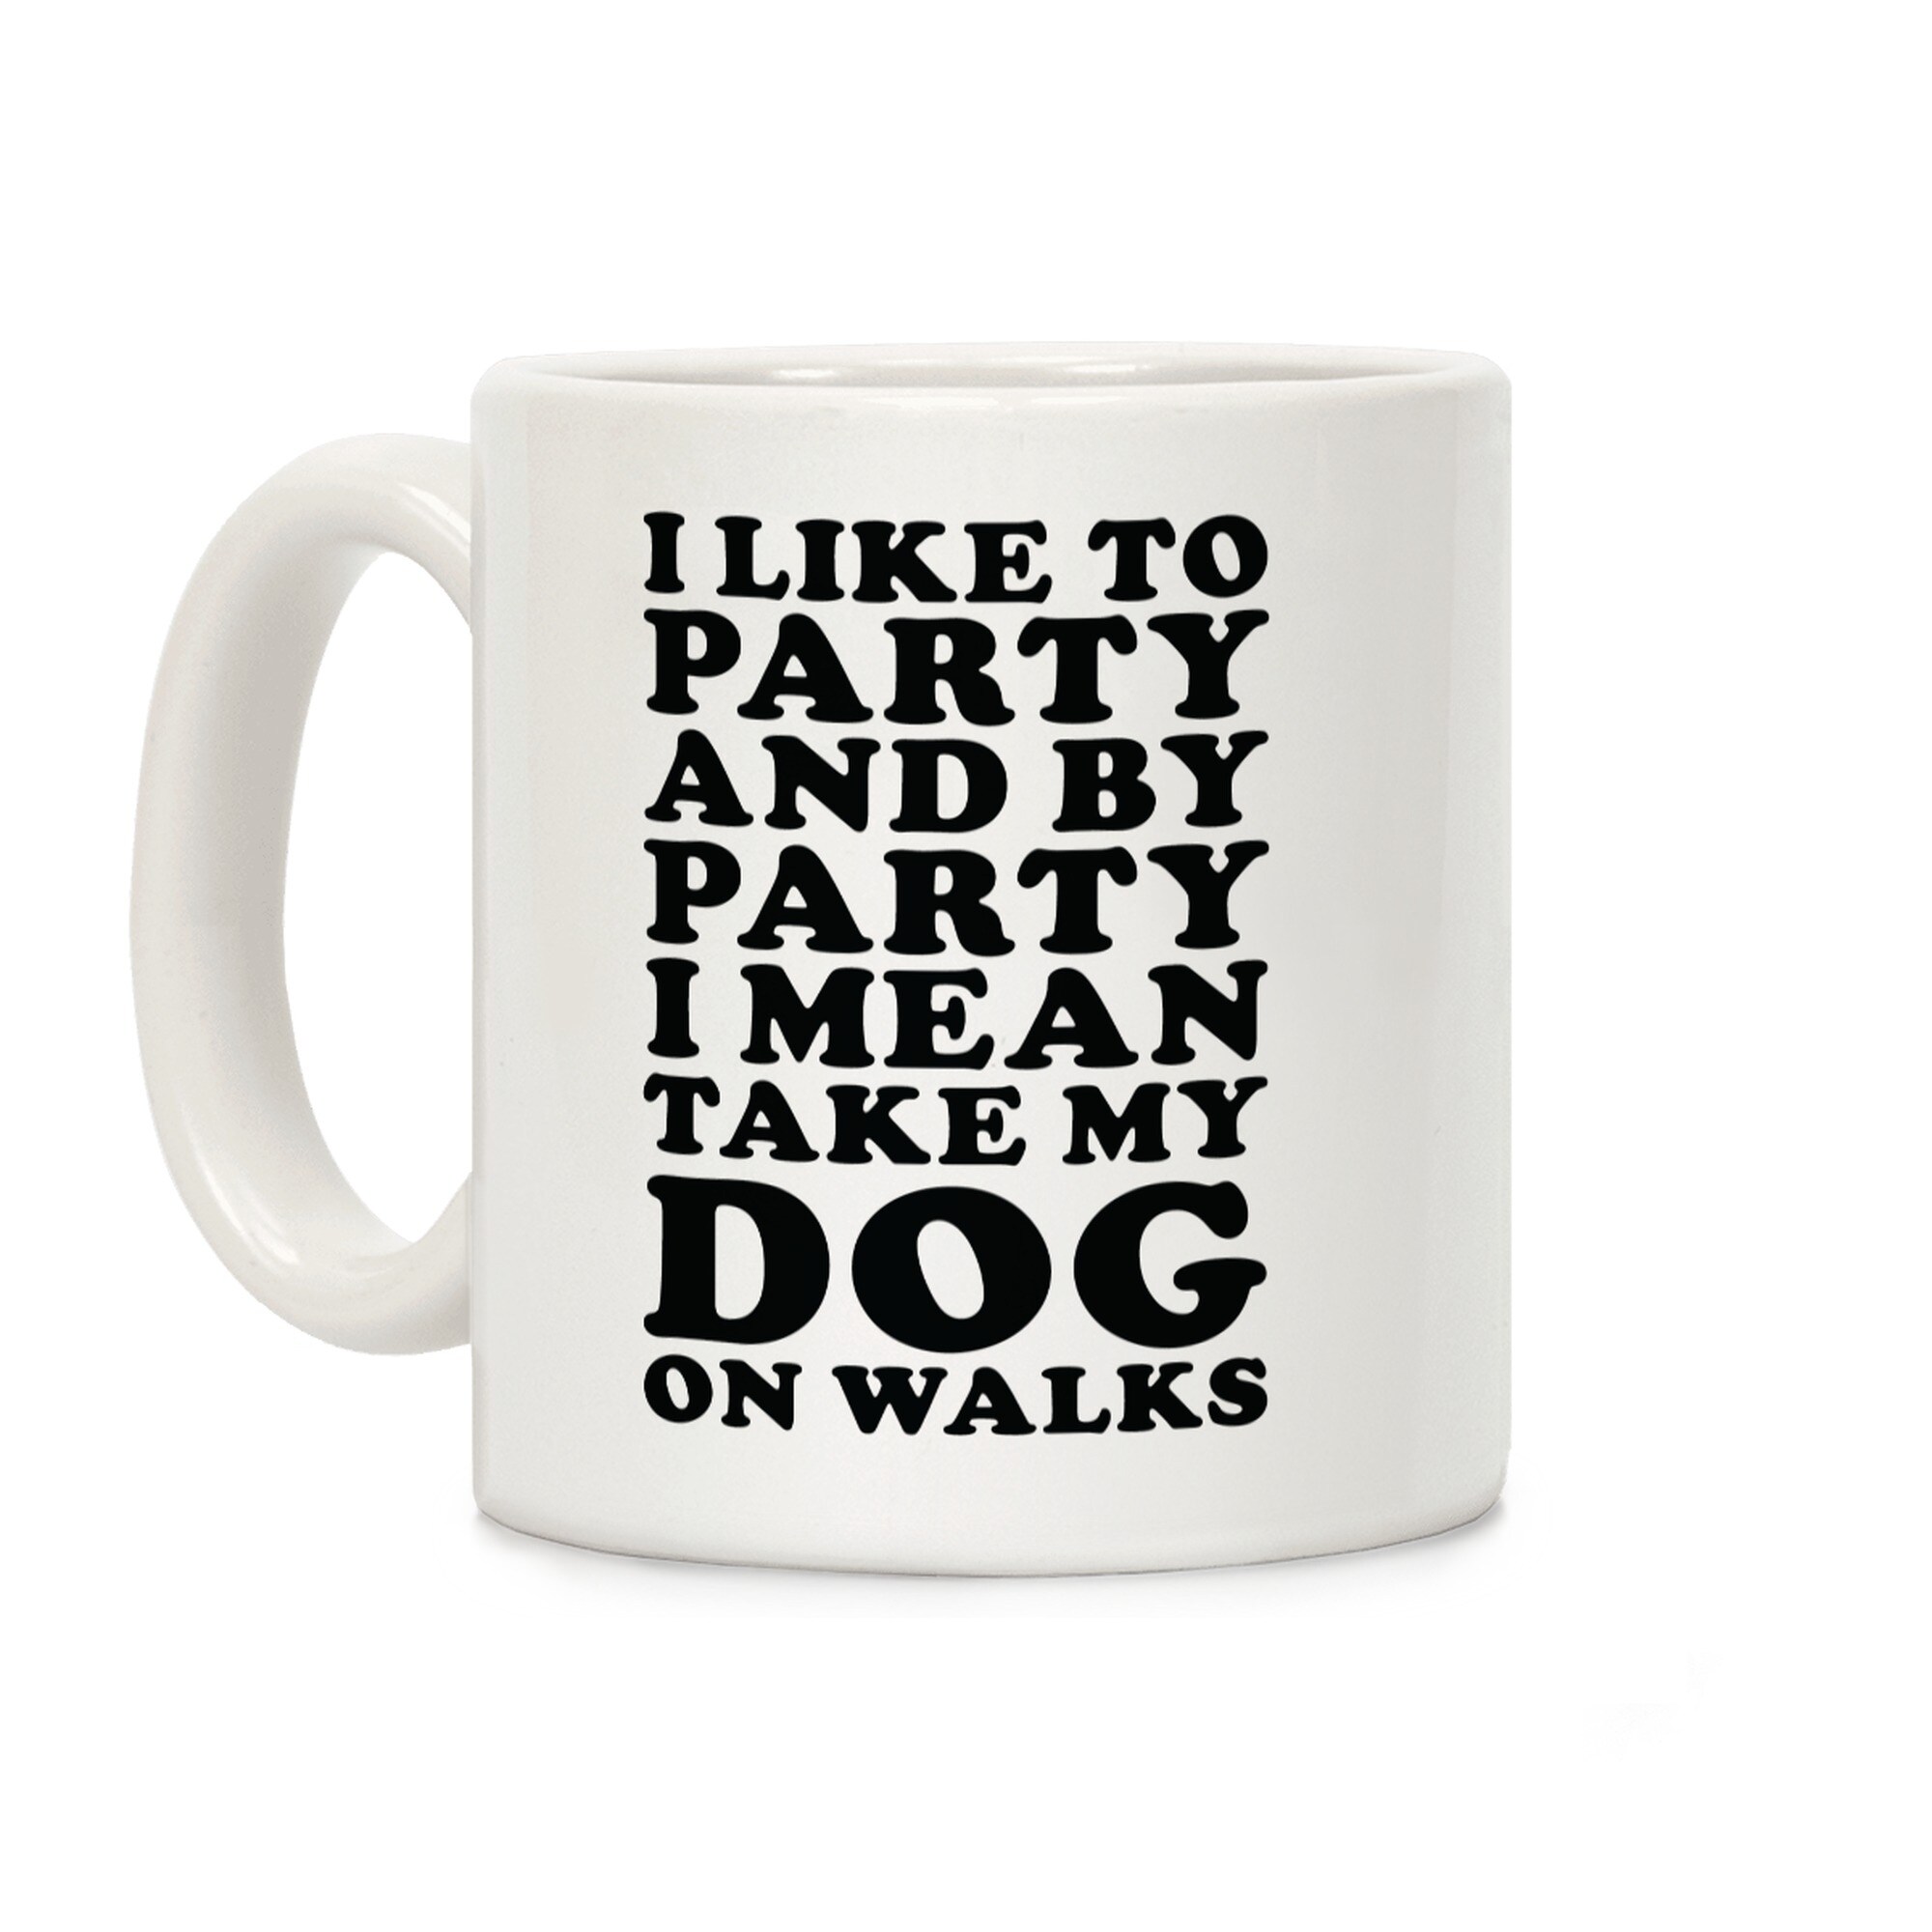 By Party I Mean Take My Dog On Walks White 11 Ounce Ceramic Coffee Mug by  LookHUMAN - Bed Bath & Beyond - 21229652